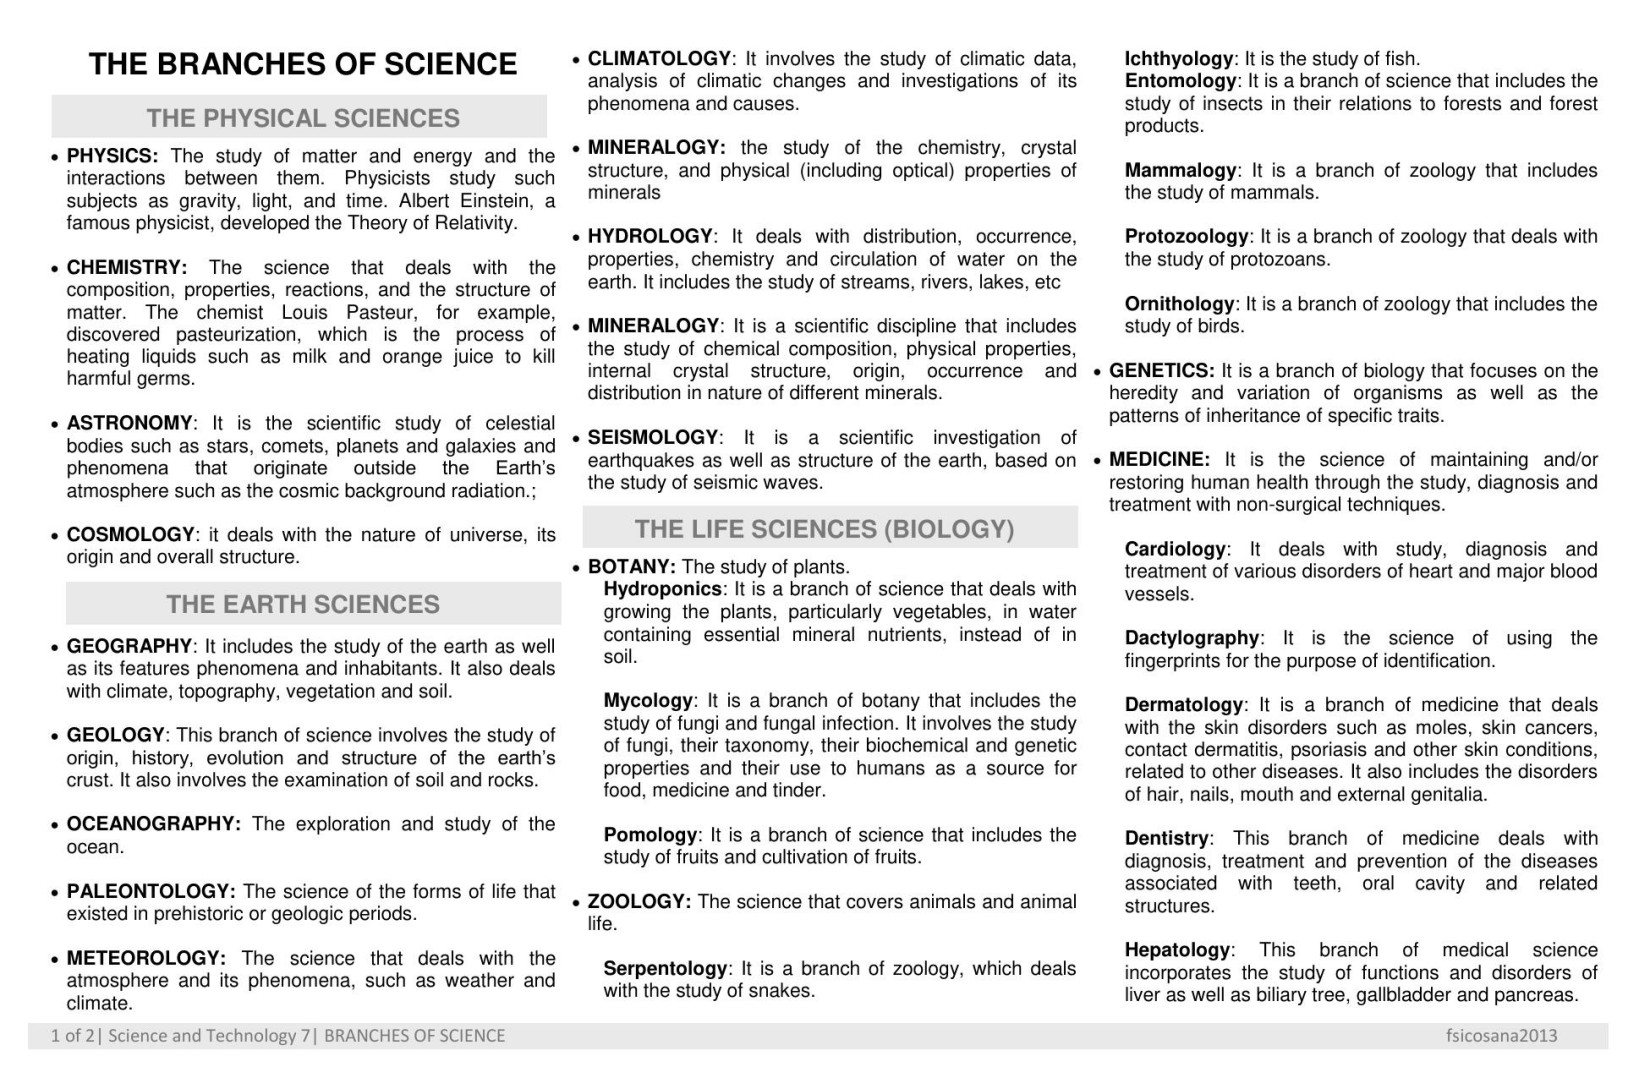 The Branches of Science